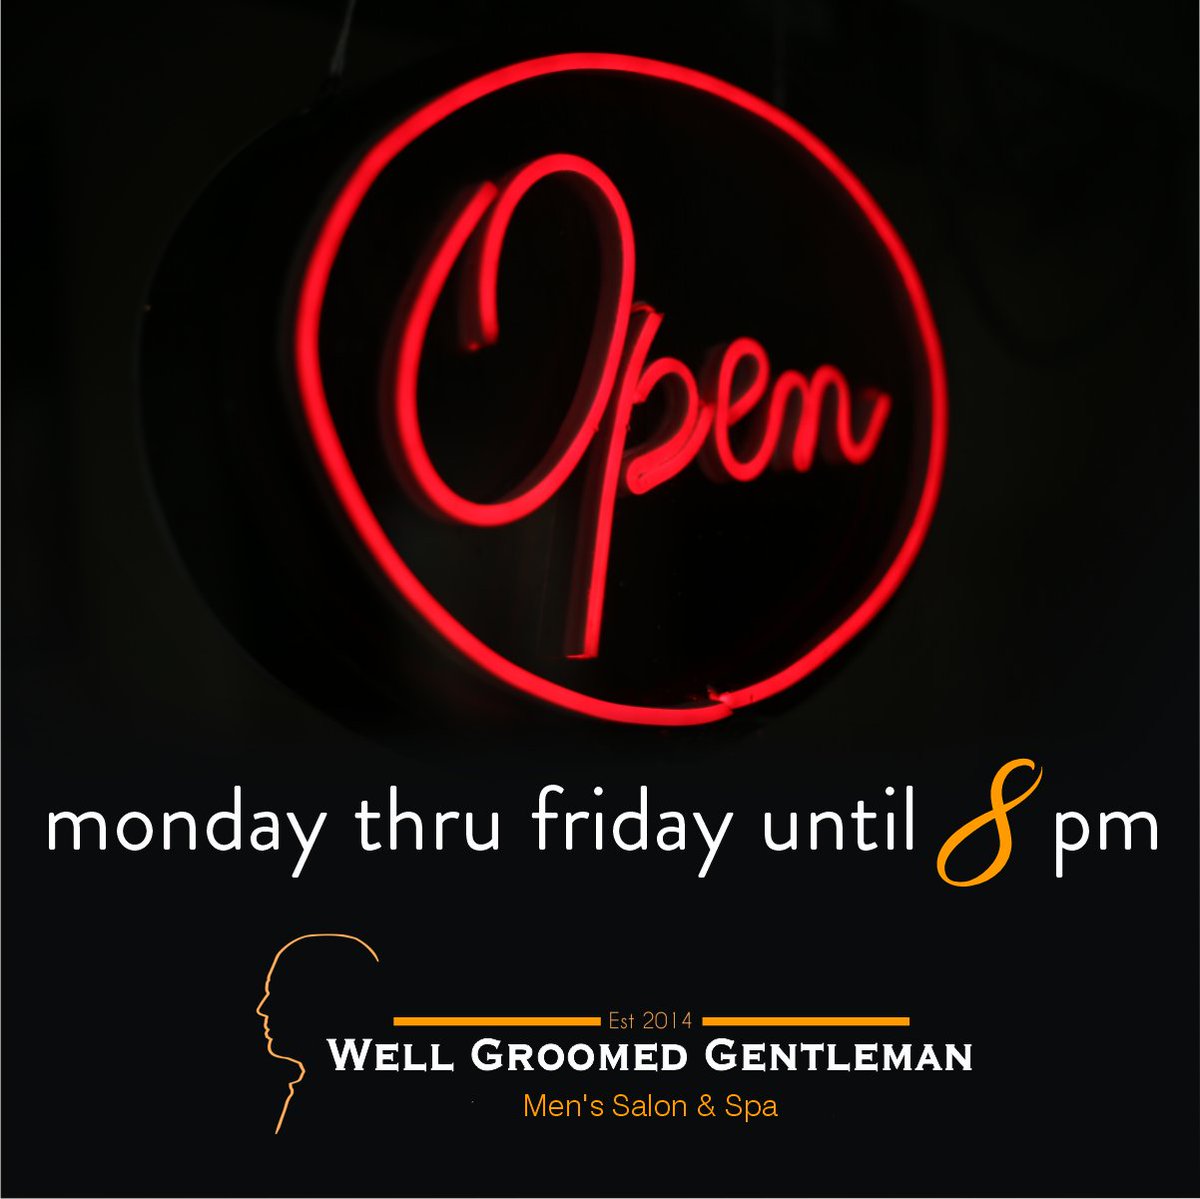 Tied up at work? Come in after hours! #TeamWGG is here for you 8-to-8 #MondayToFriday... And the #cafecito 🍵 is on us! #lookgood #feelgood
.
Schedule your appointment at
☎️ 786.362.6360
WellGroomedGentleman.com
.
#wellgroomedgentleman #handsome #miami #coralgables #barbershop